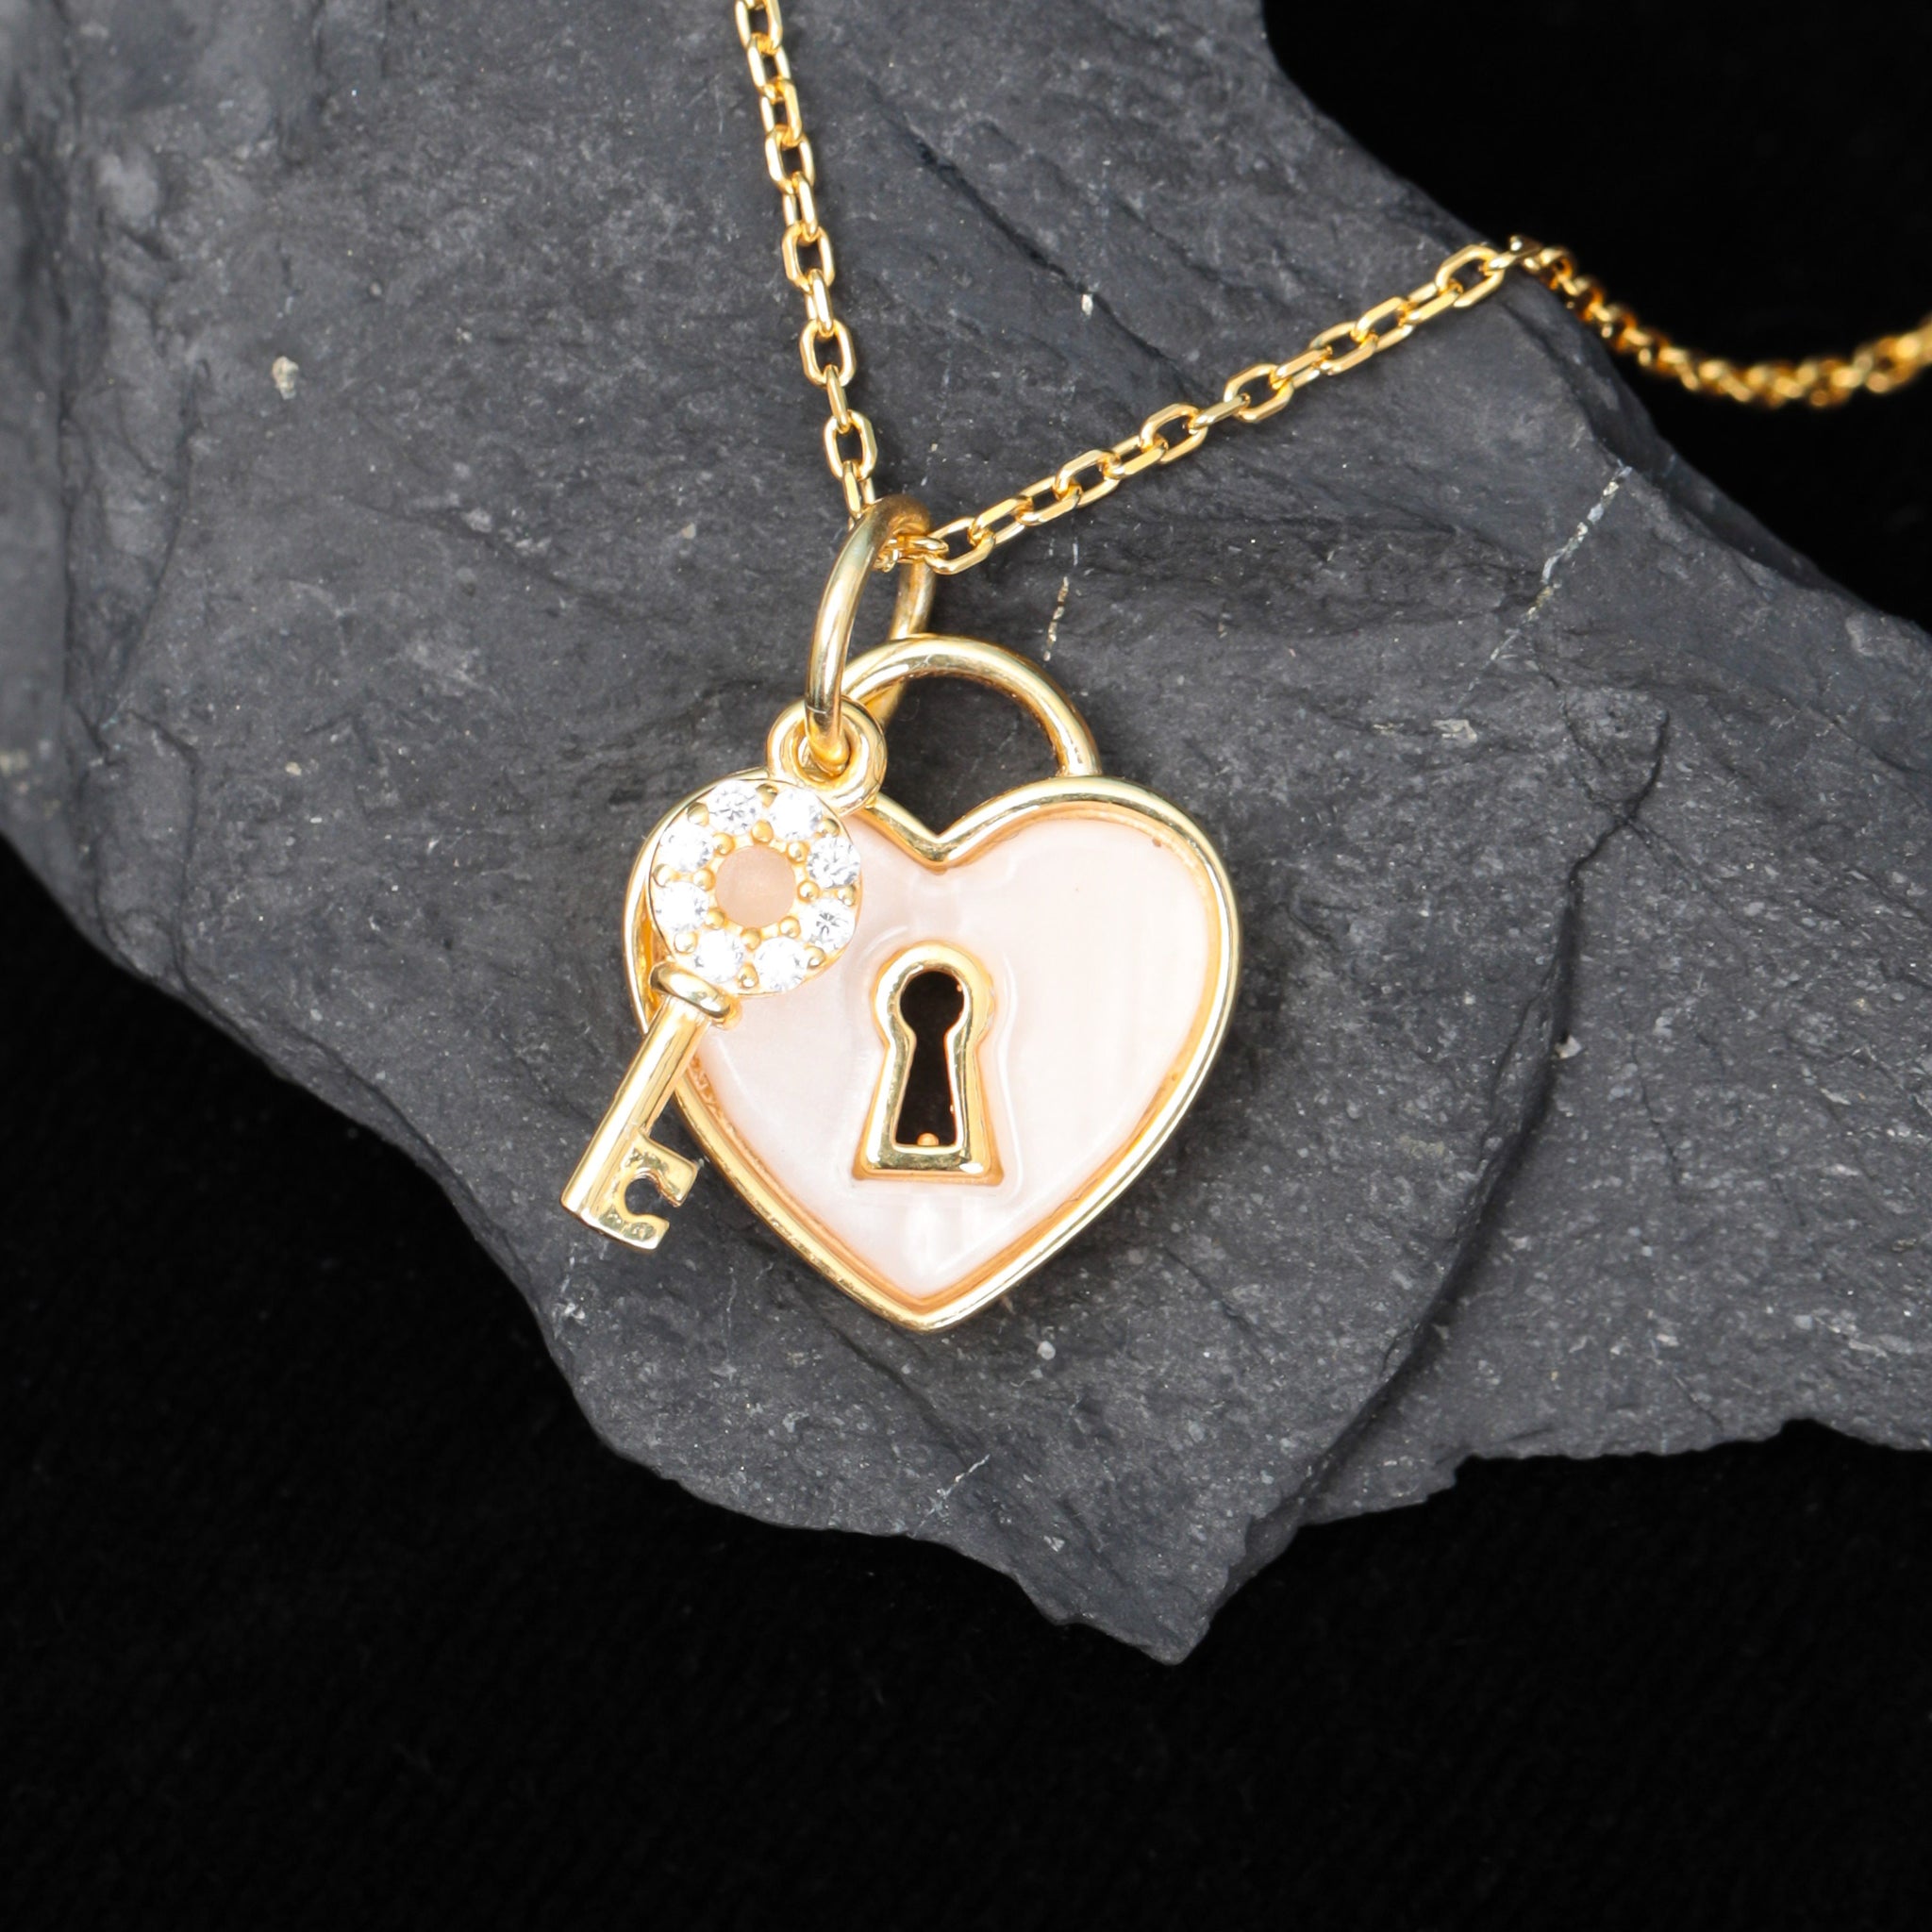 Heart Lock and Key Mother of Pearl Necklace Valentines Gift Heart Lock Pendant Key Pendant Dainty Necklace Mother Day Gift